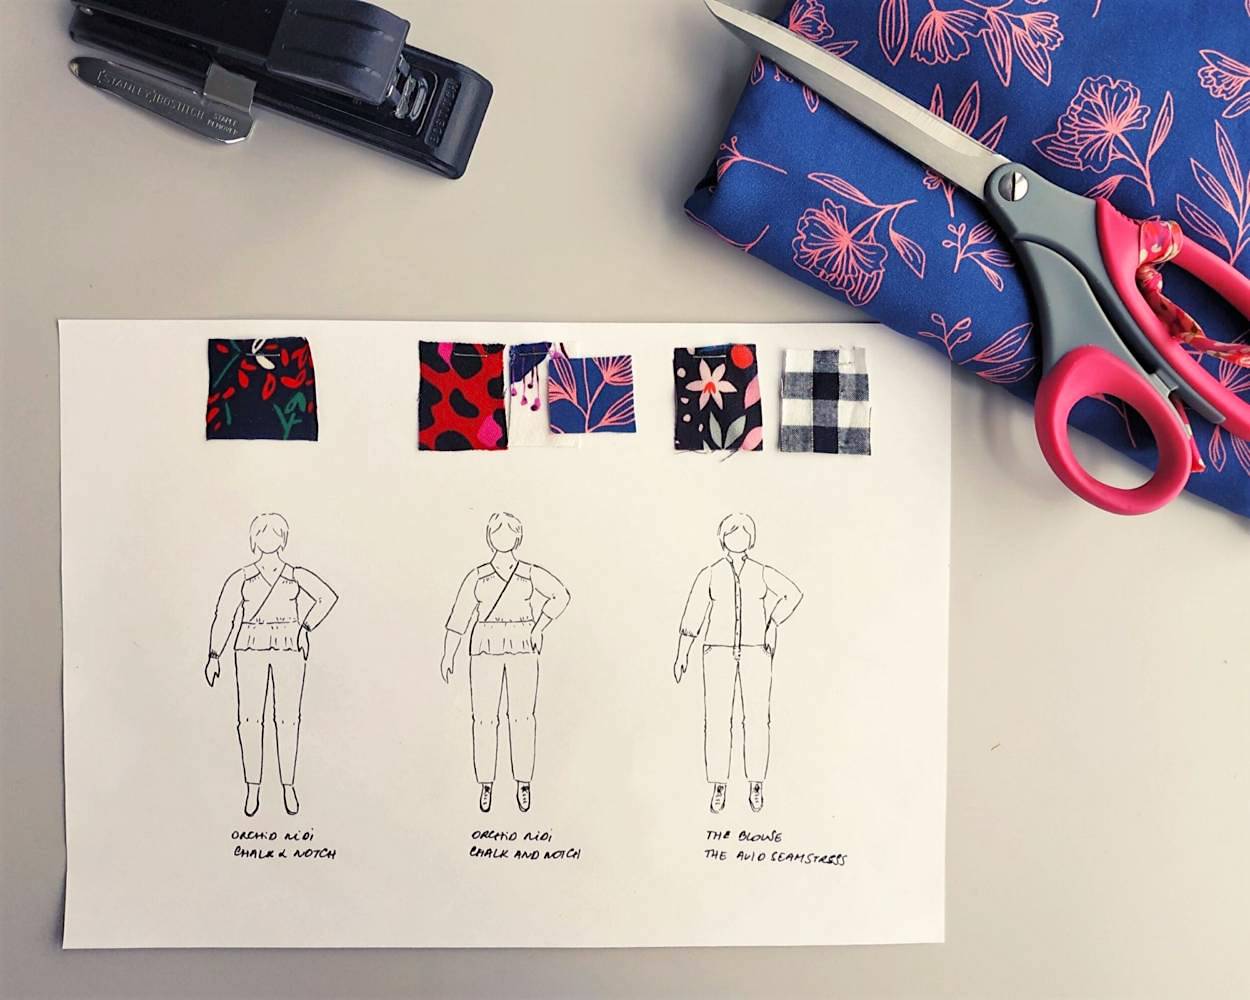 Nathalie @flowcouture.be planned to make multiple versions of a pattern and attached fabric swatches to visualize her makes using the 3 model page from her printable MyBodyModel fashion sketchbook.